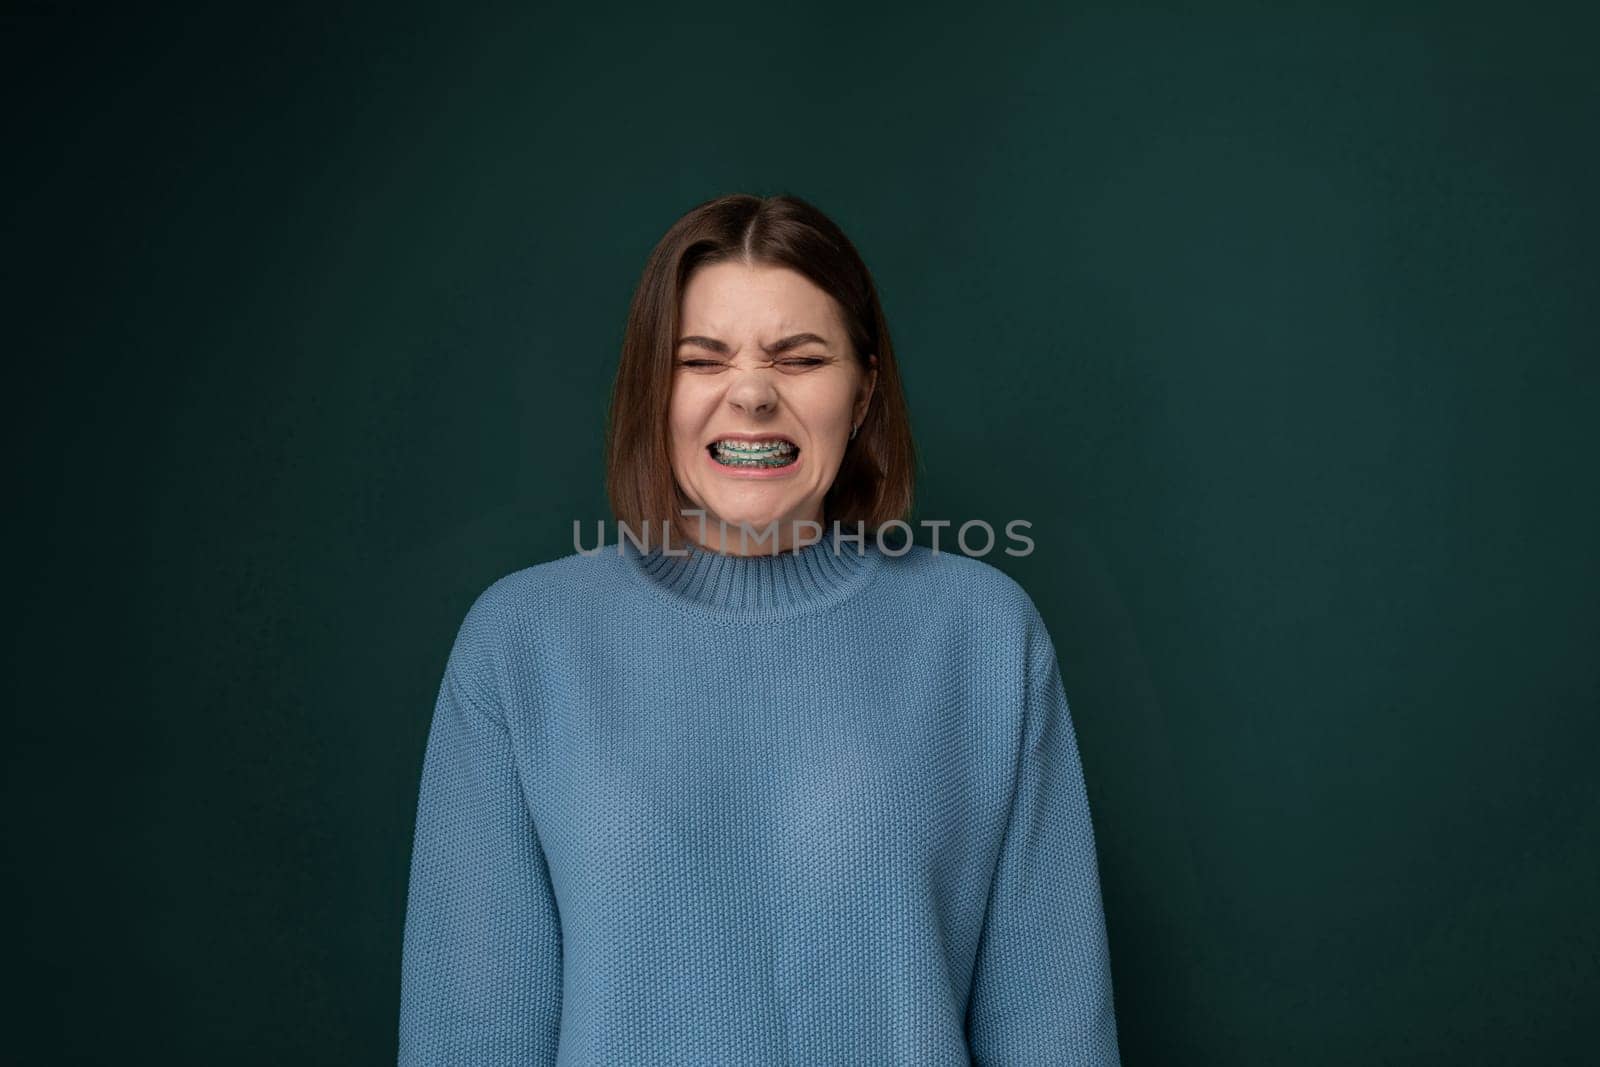 A woman wearing a blue sweater is contorting her facial expression, displaying emotions or reactions. The background is simple and focuses on the subjects actions.